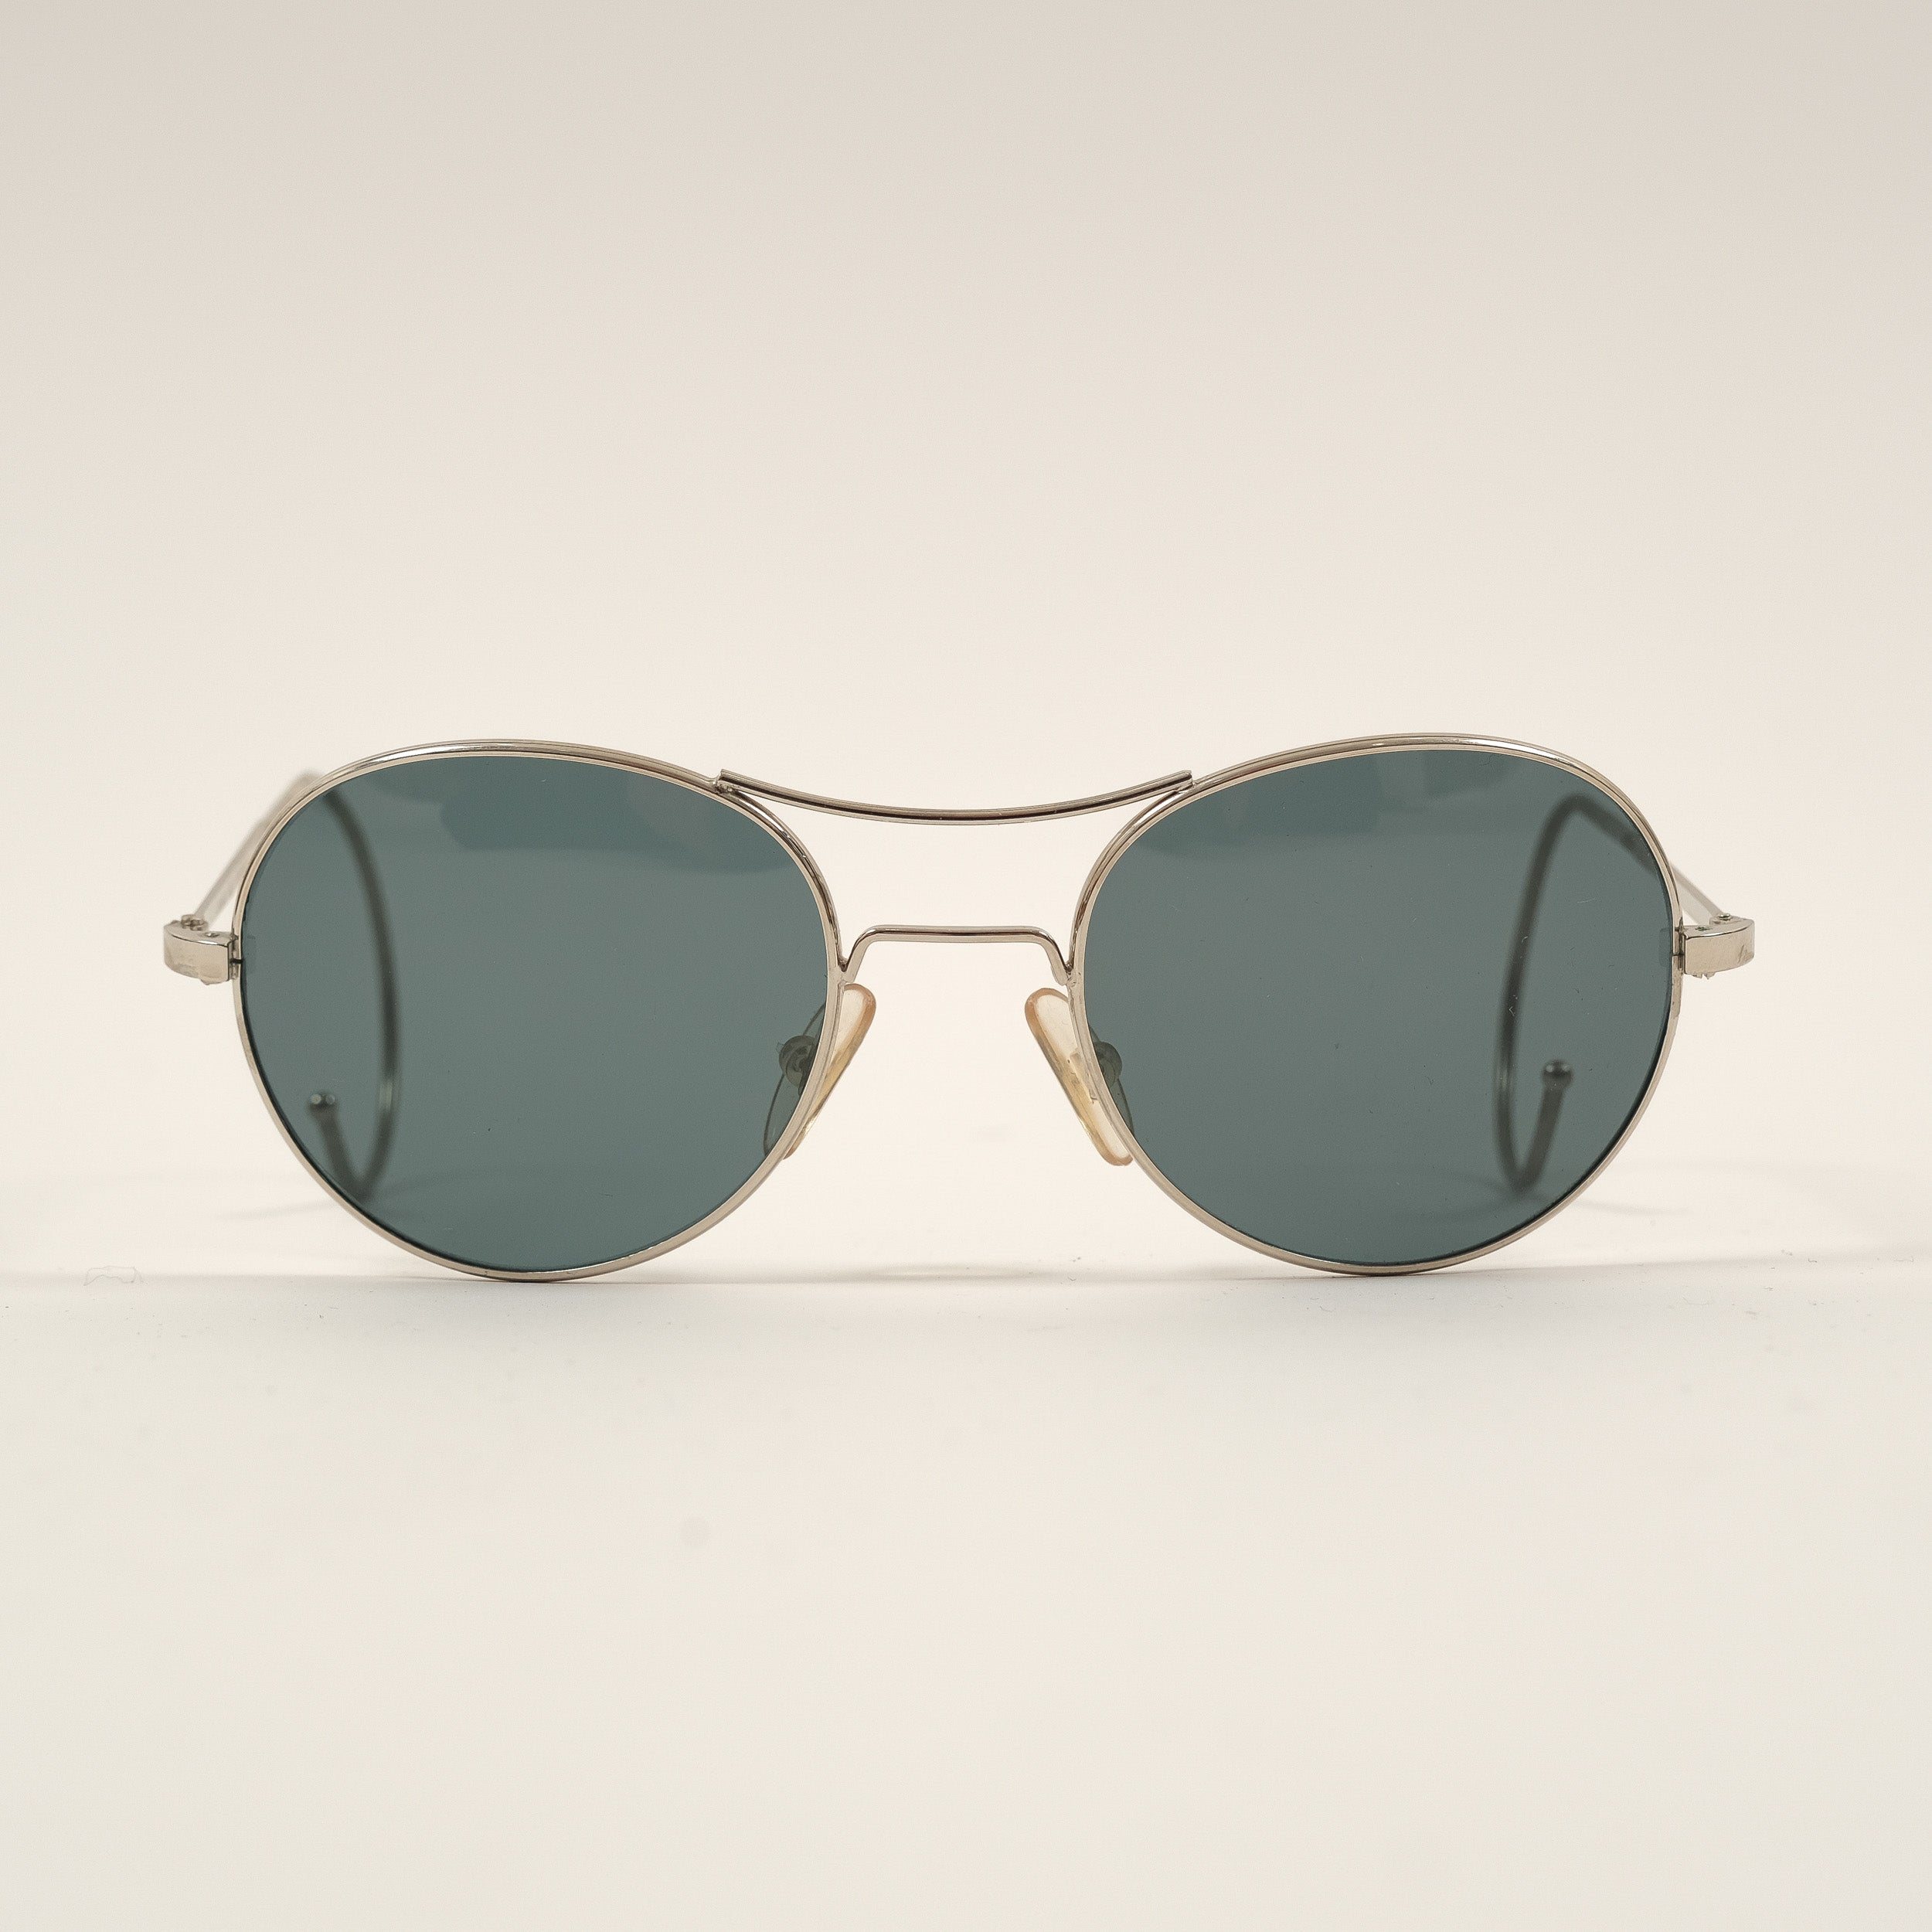 1950 FRENCH SUNGLASSES